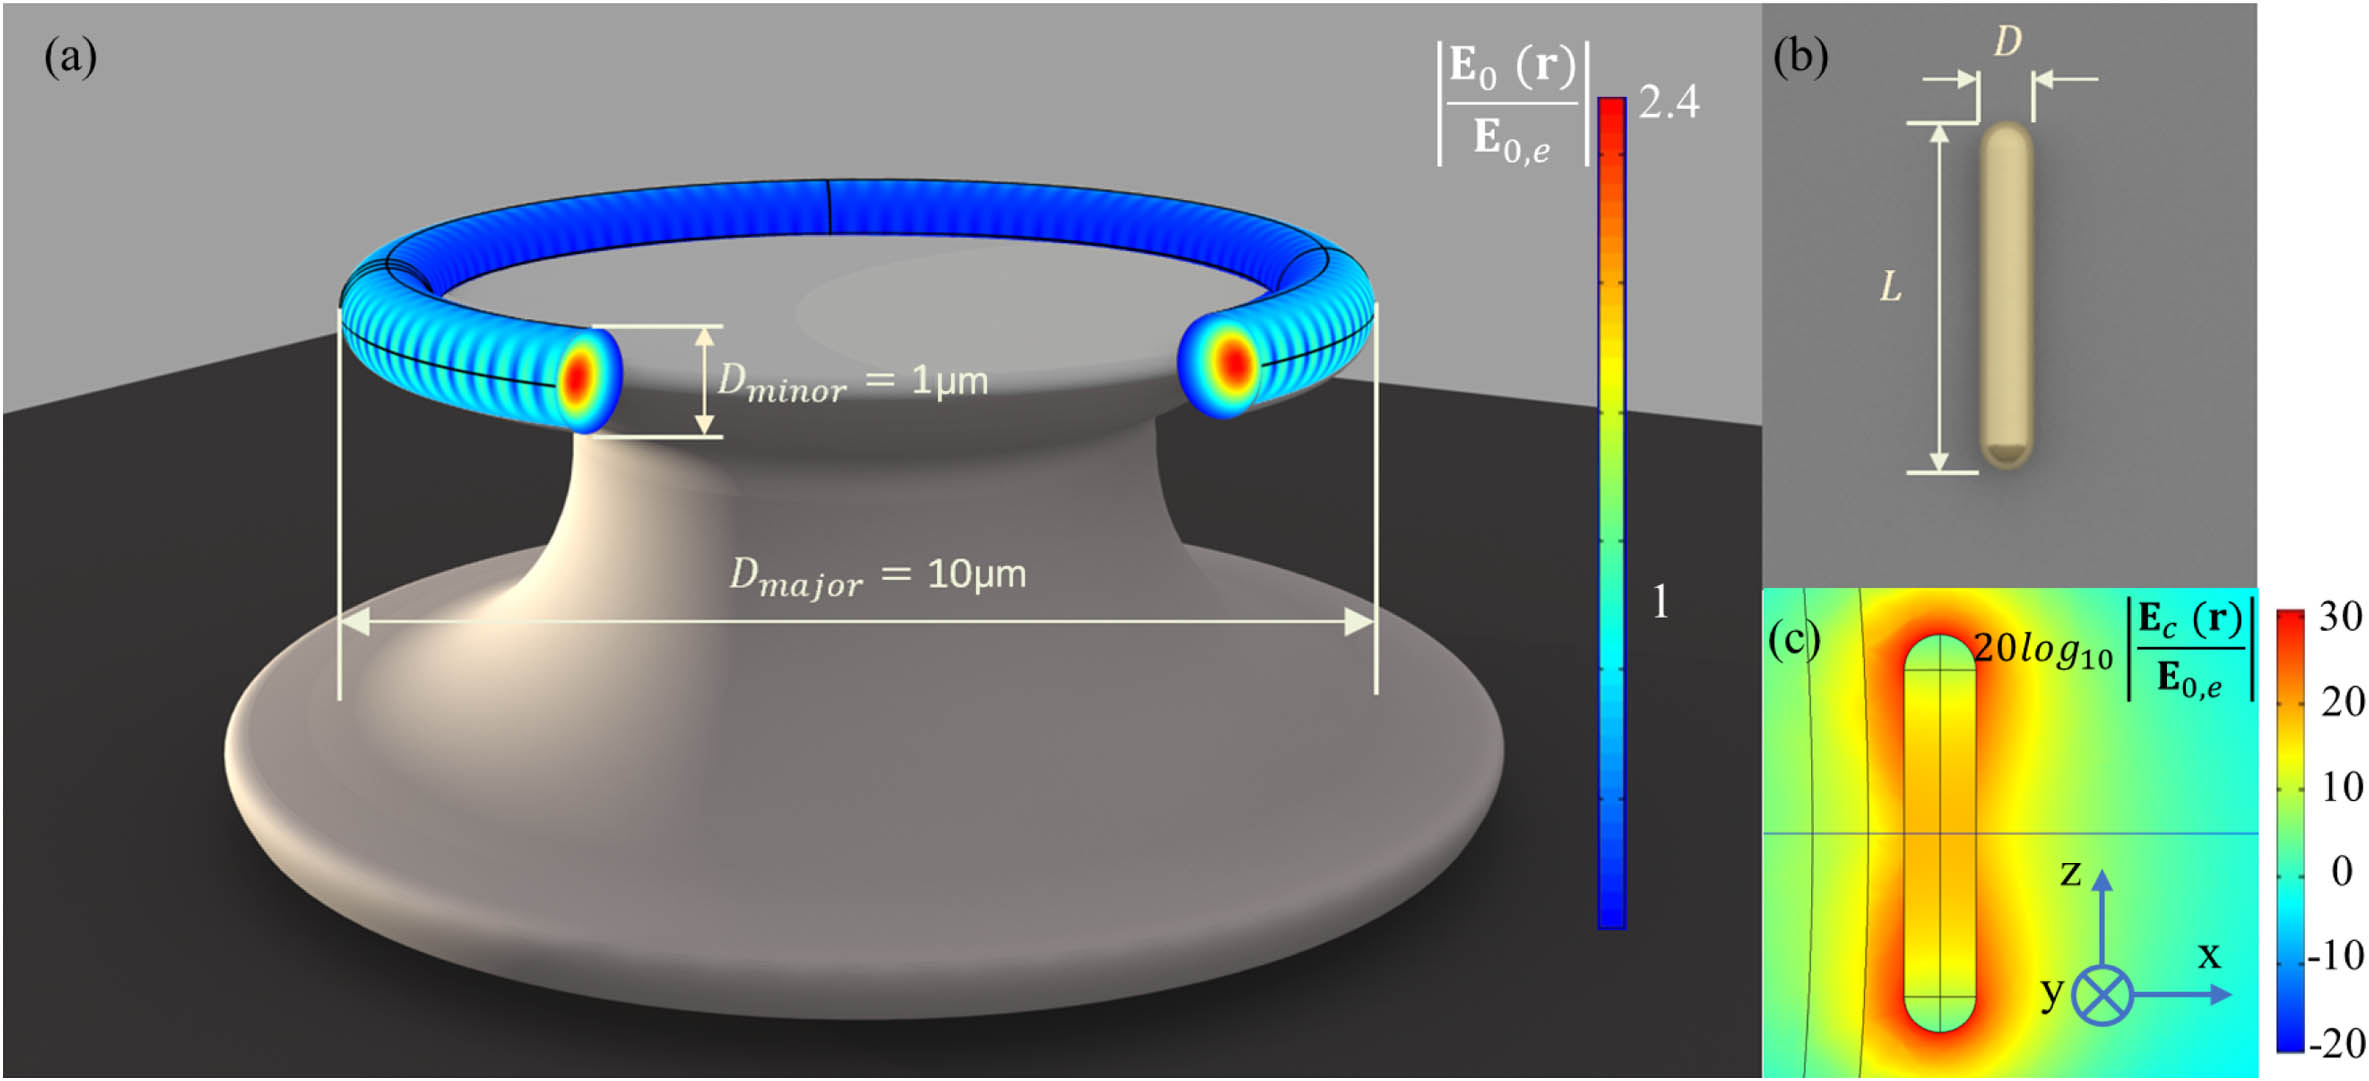 Schematic of a microtoroid cavity. (a) The E-field is normalized by the amplitude of the maximum field in the evanescent zone of the bare WGM toroid [Eo(r)]. (b) A rendering of a gold nanorod placed parallel to the TE polarization of the WGM cavity mode. The resonance frequency of a single rod is tuned by adjusting its aspect ratio, which is defined as the ratio of the length to the width (diameter) of the rod. (c) Field distribution of the excited dipole mode around a nanorod.